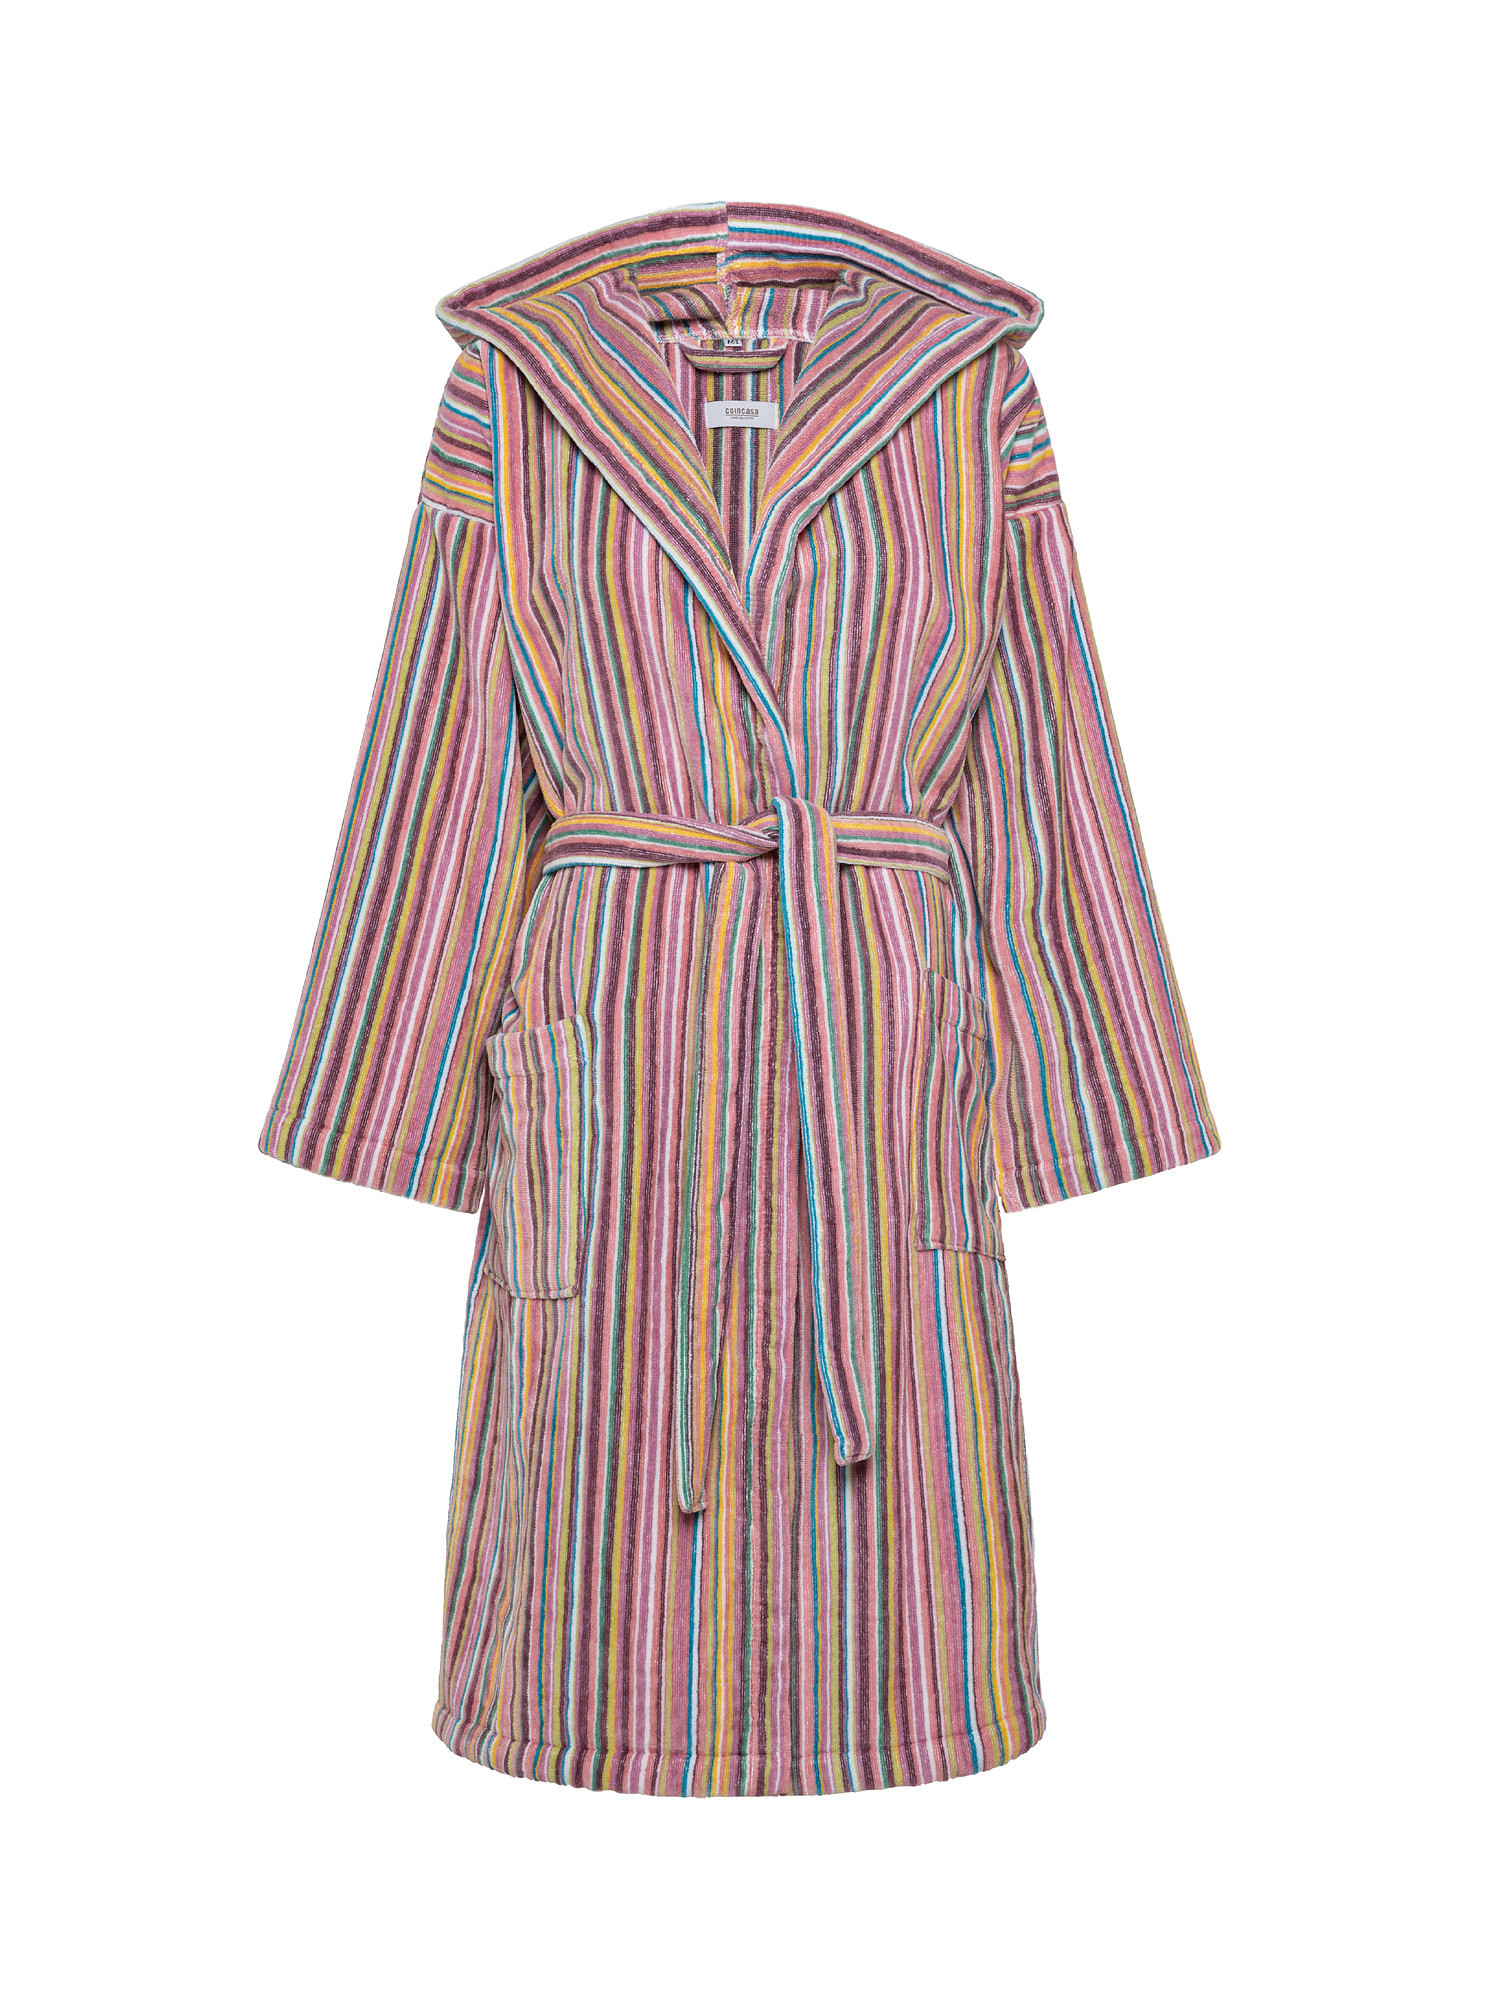 Cotton velor bathrobe with striped pattern, Multicolor, large image number 0